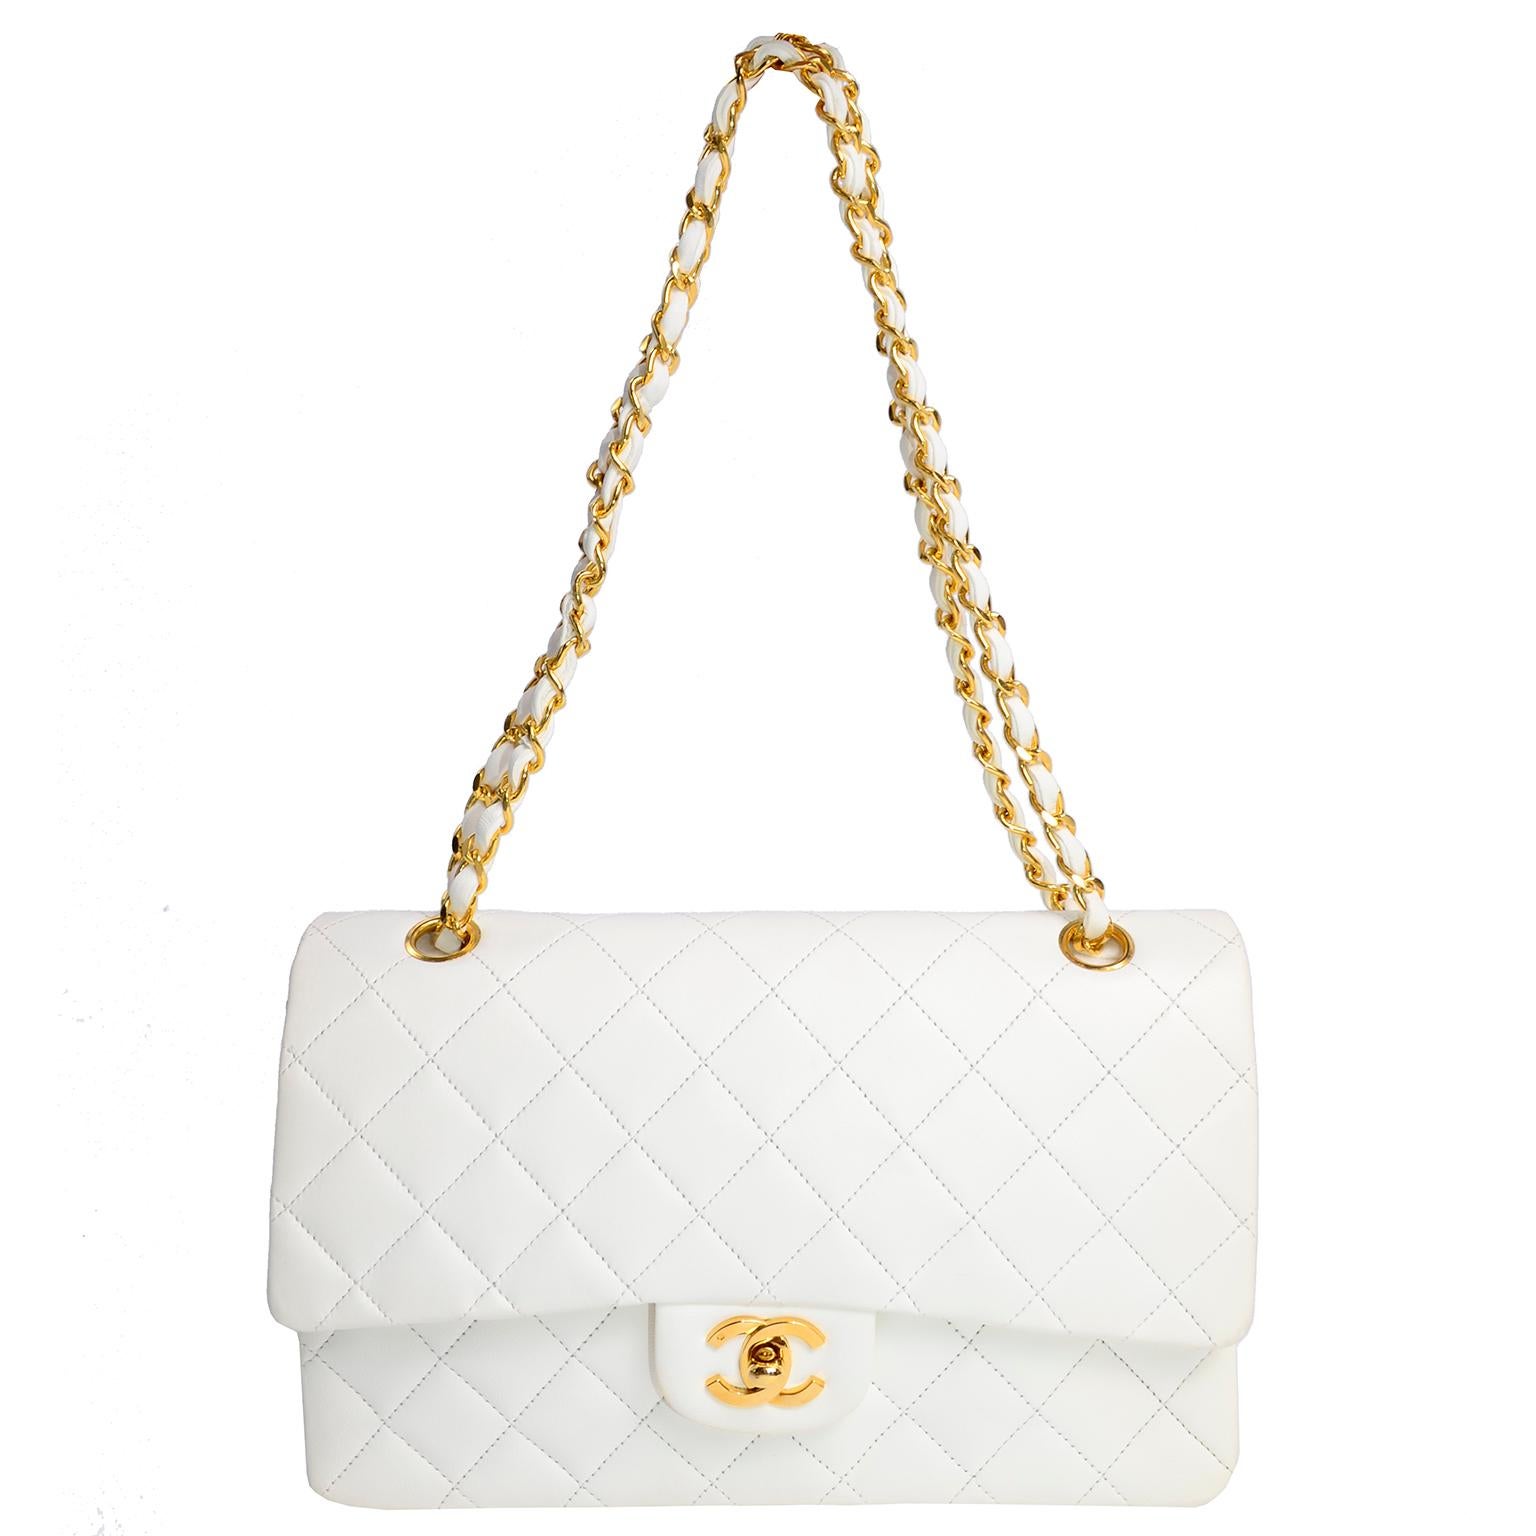 This is an unused vintage but new Chanel white quilted medium flap bag with its original tissue inside.  Beautiful gold hardware and leather and gold chain strap. The bag comes from a single owner who never used it and kept it with the original